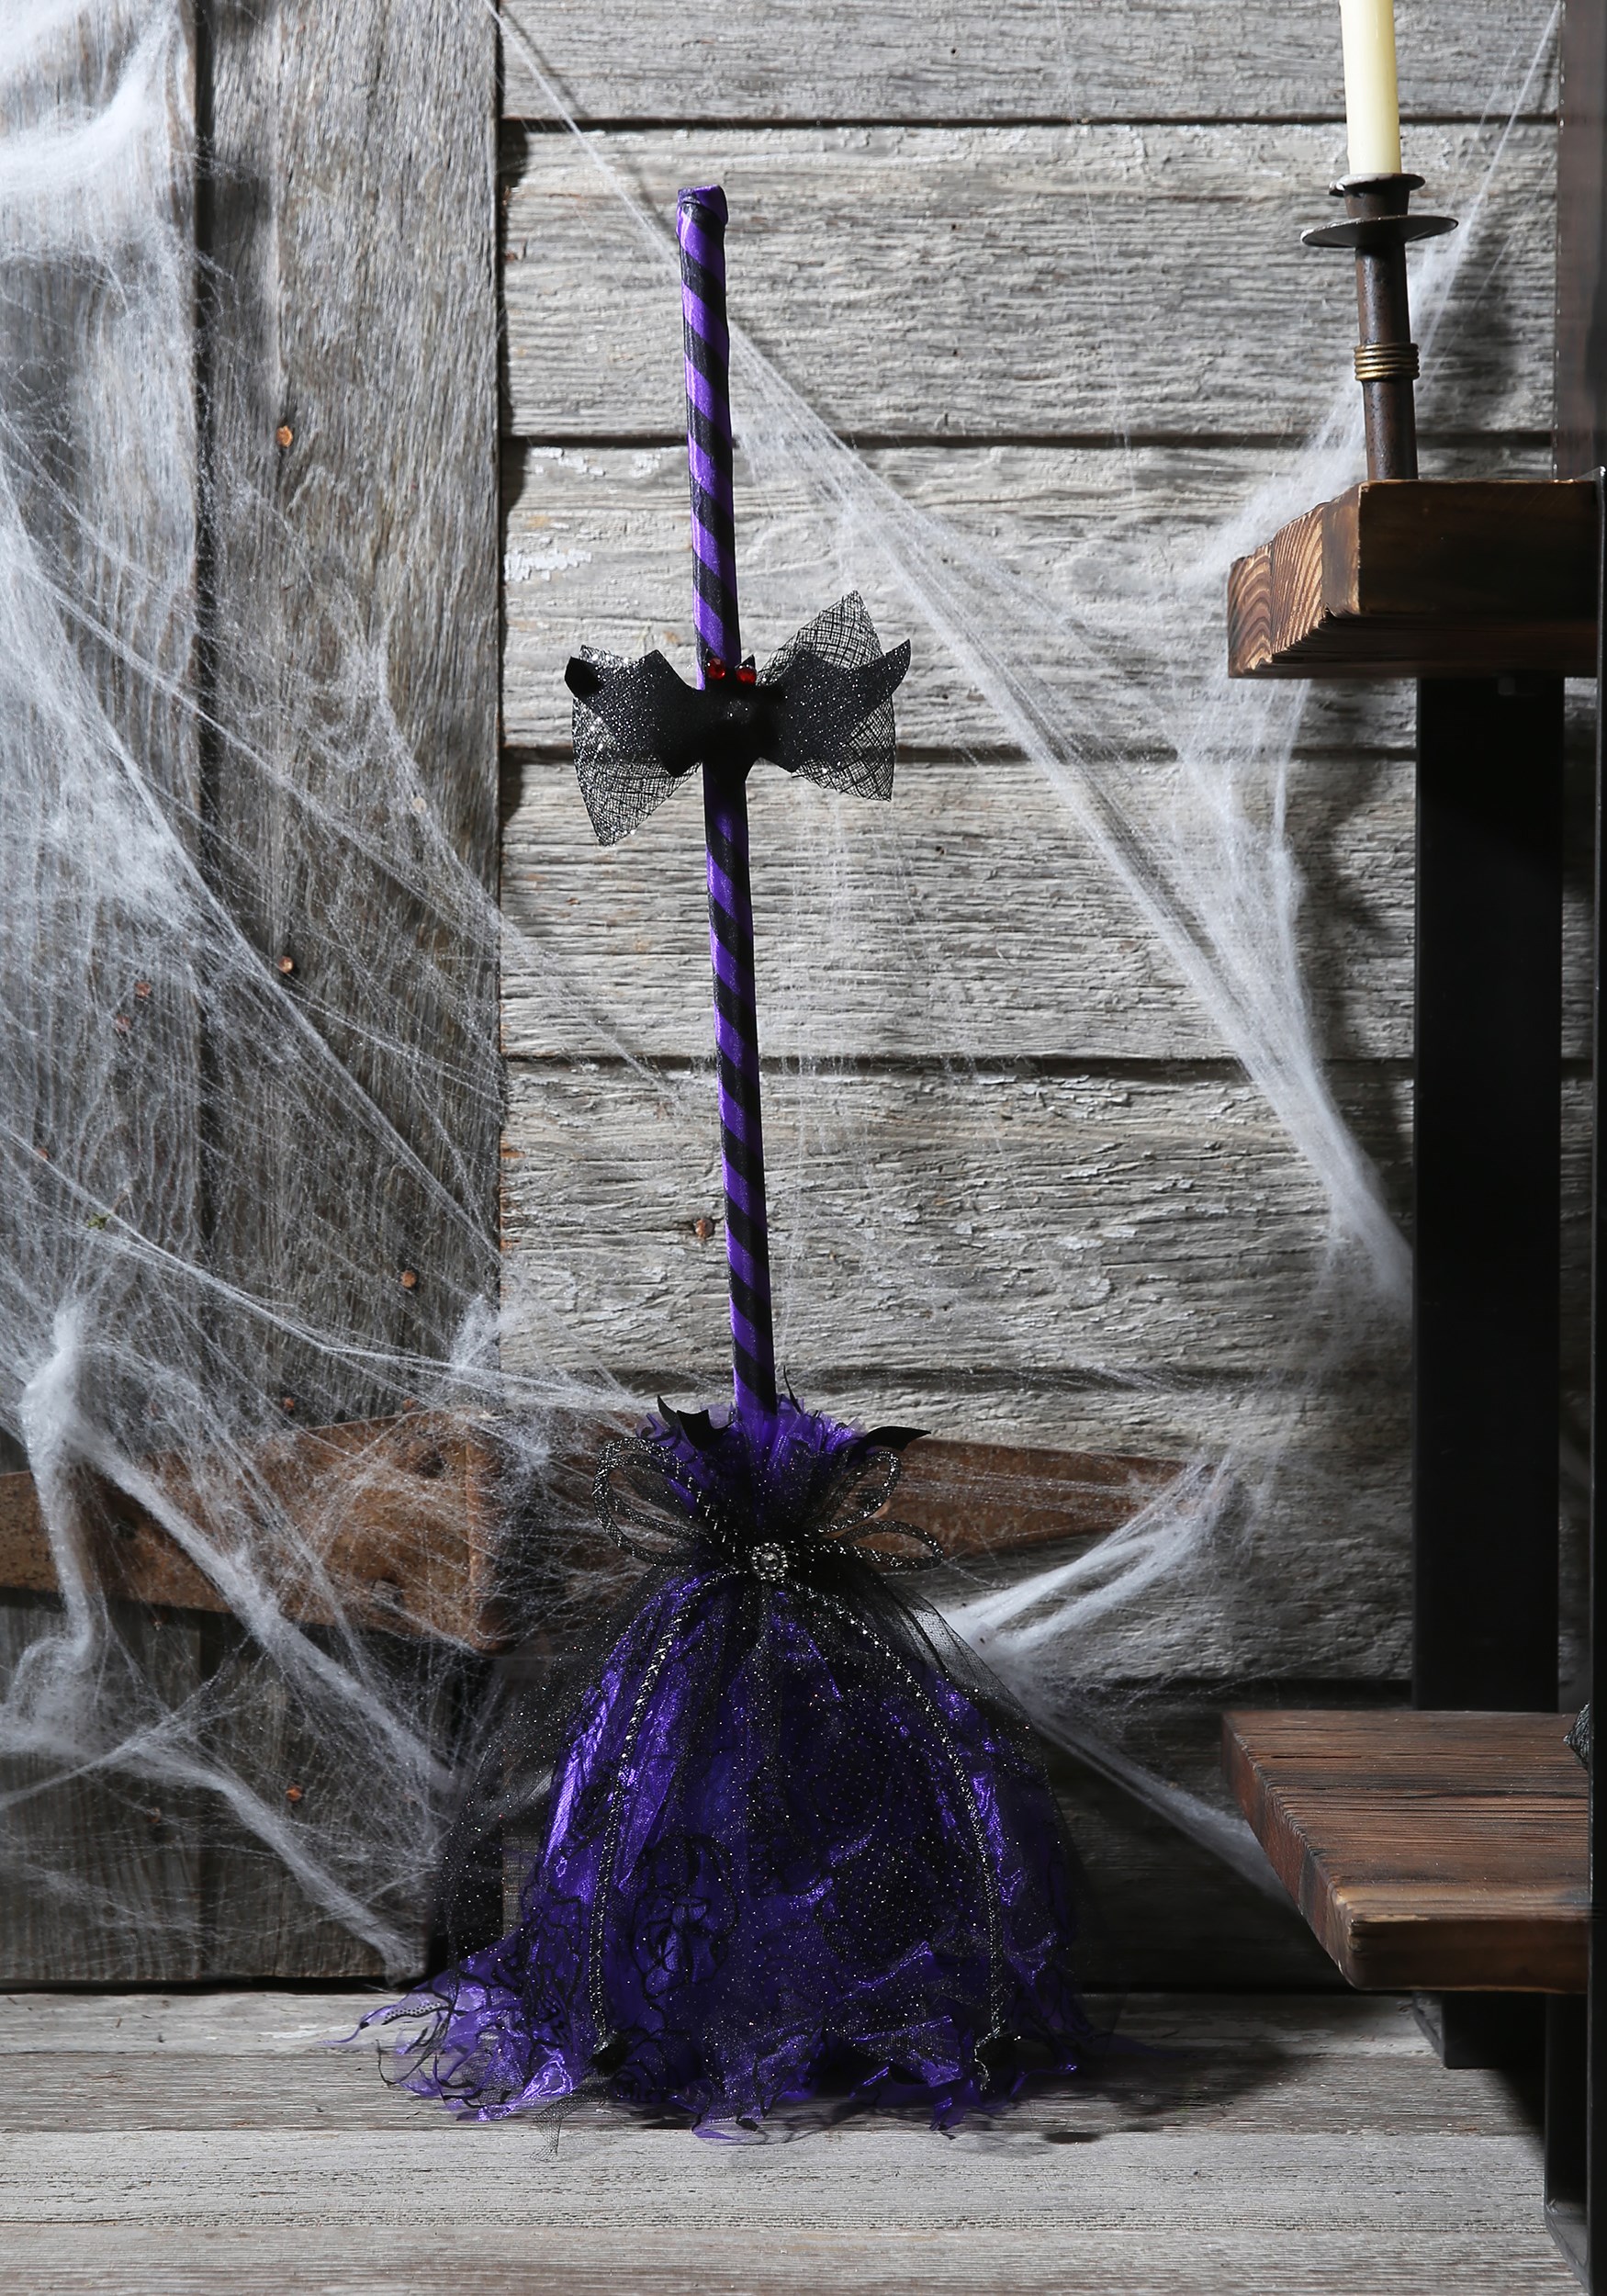 Purple Animated Shaking Broom Witch Costume Accessory